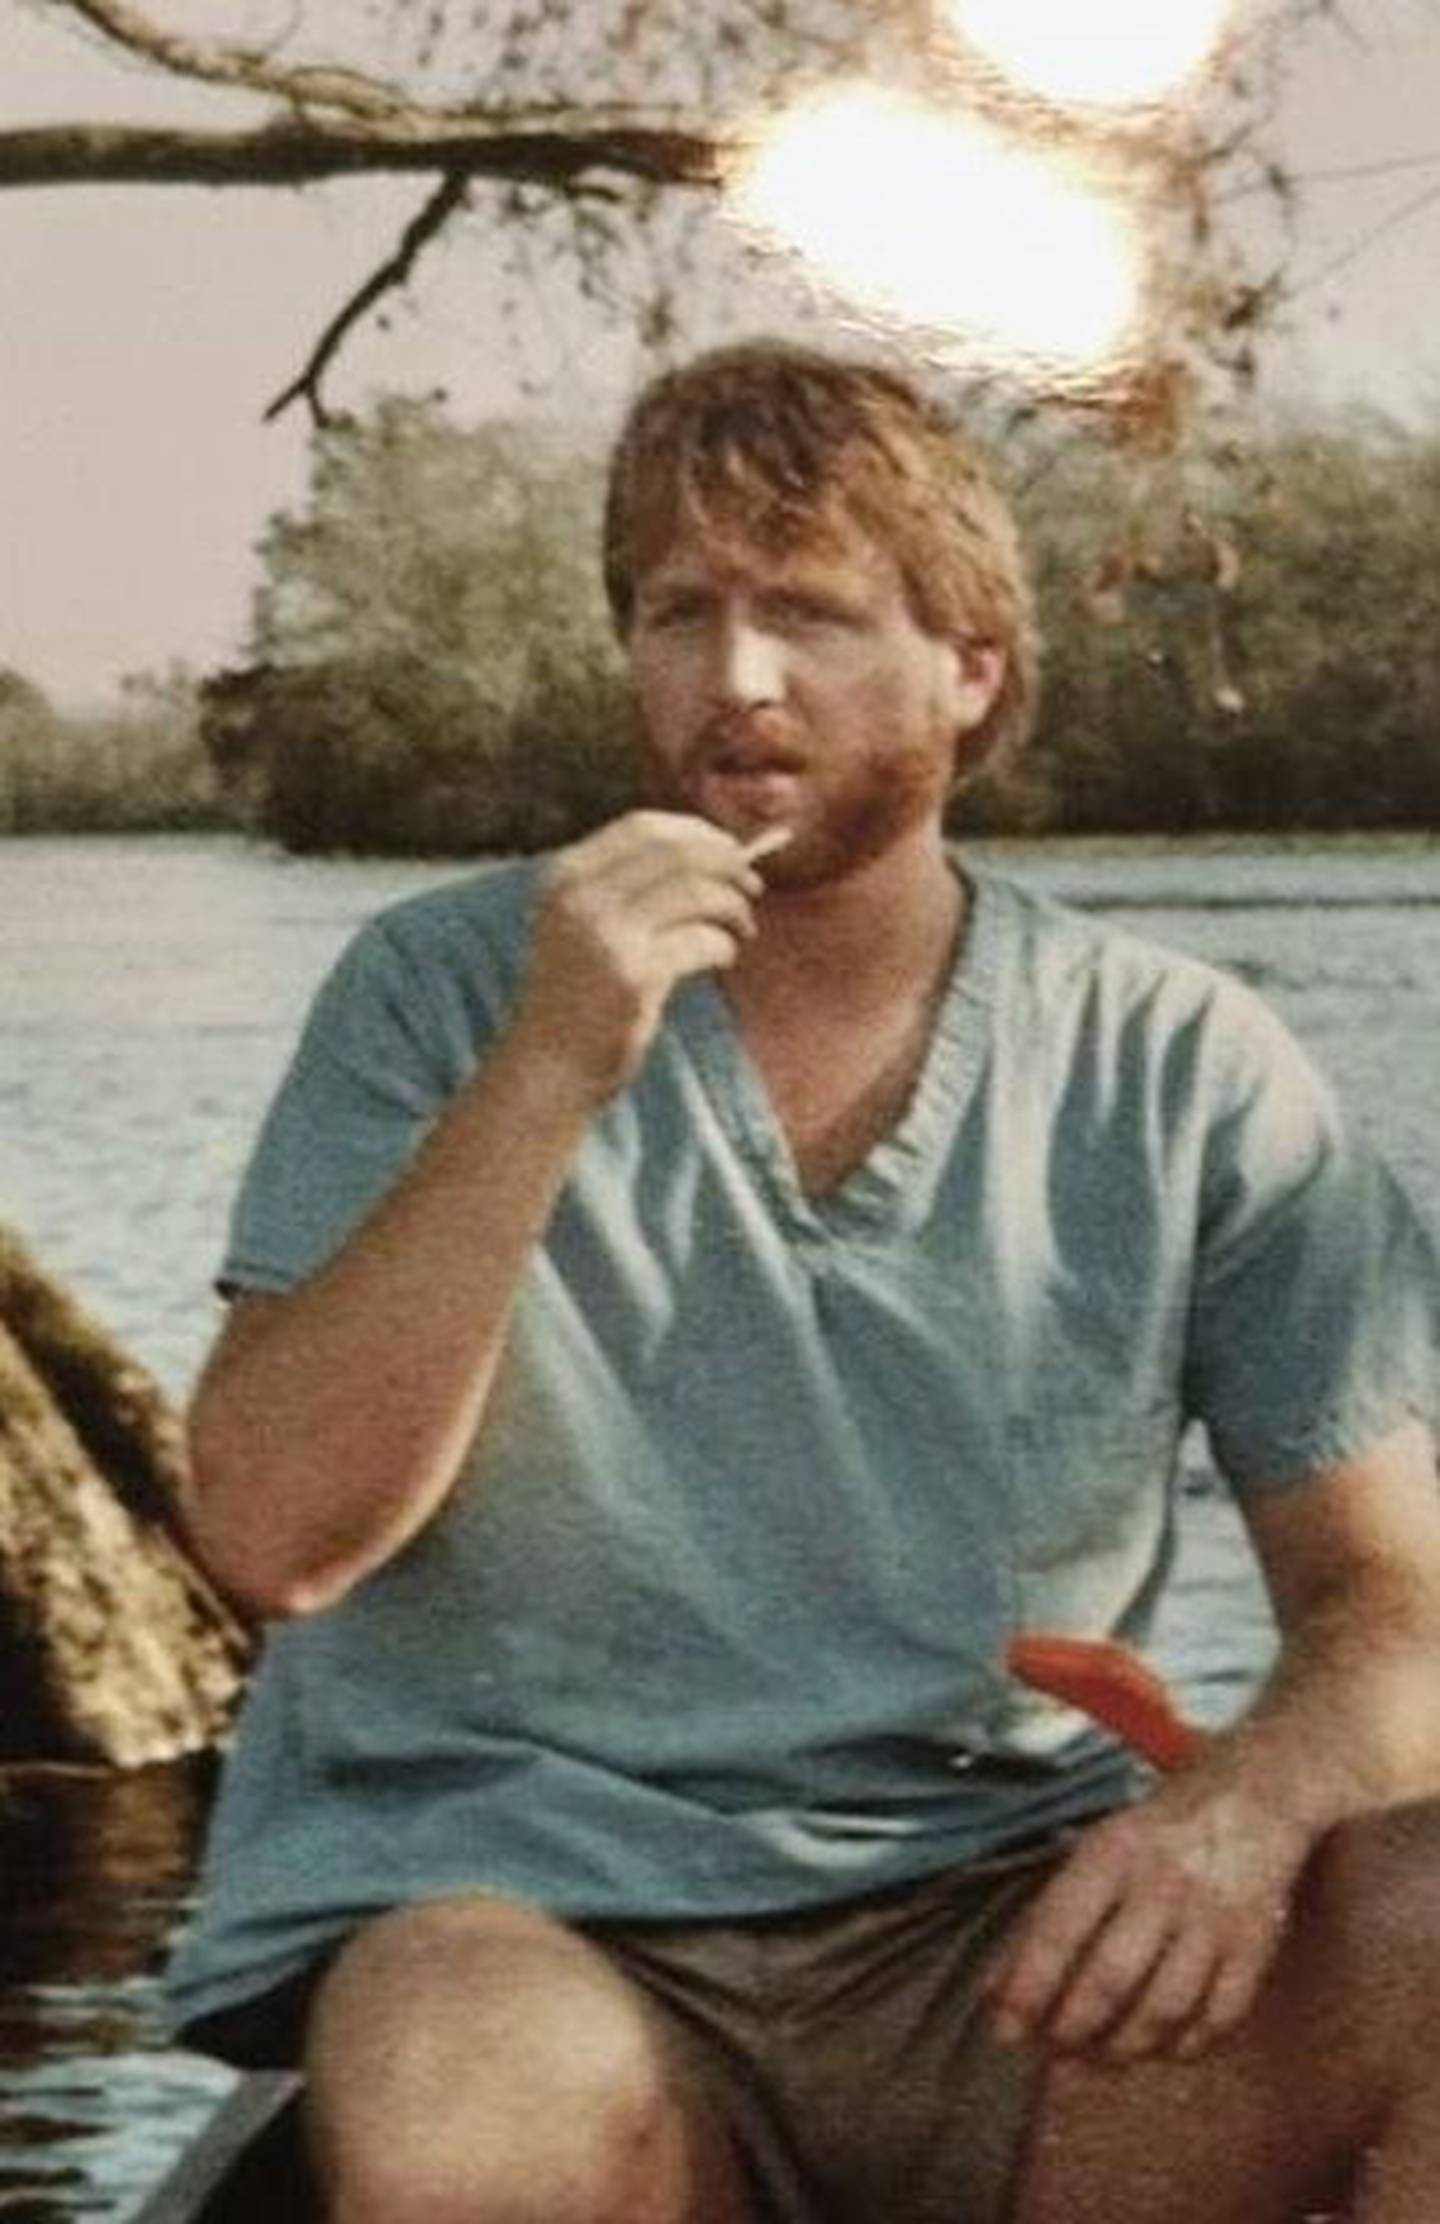 Rick Hutzell on a canoe in about 1984 with something in his hand that is not, as he told his kids, a Q-tip.